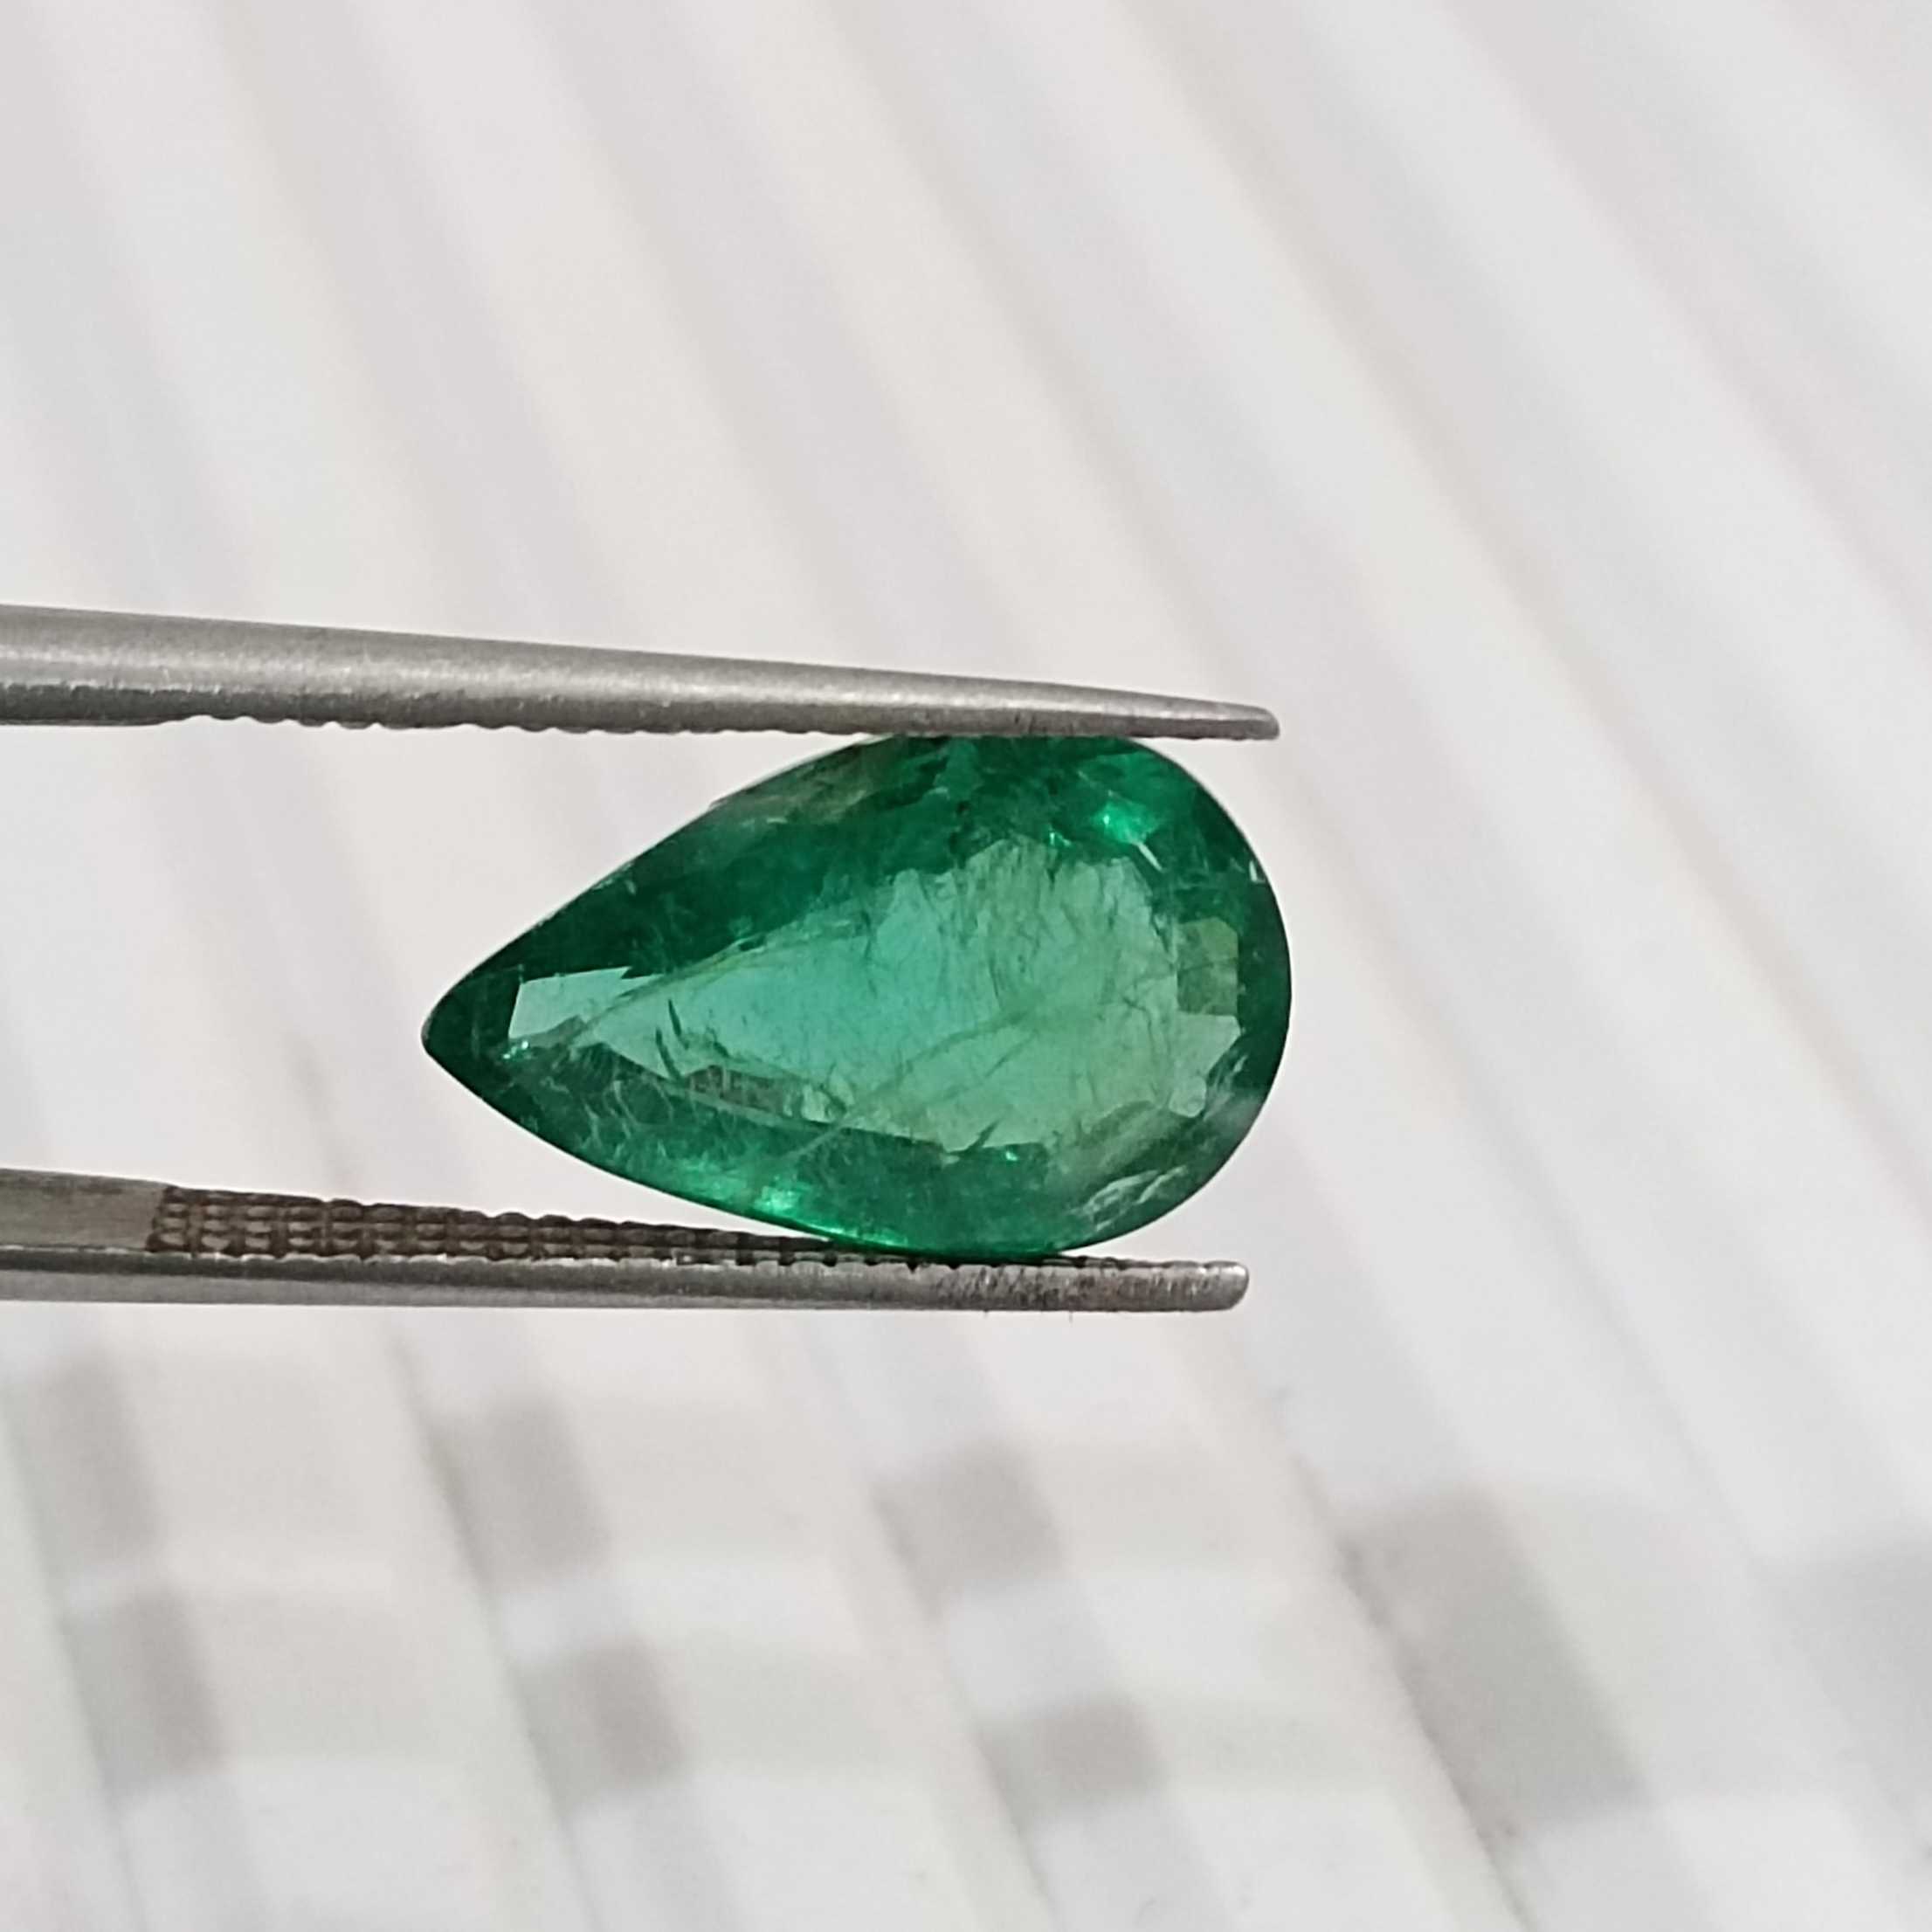 2.93ct saturated golden green pear shape emerald/